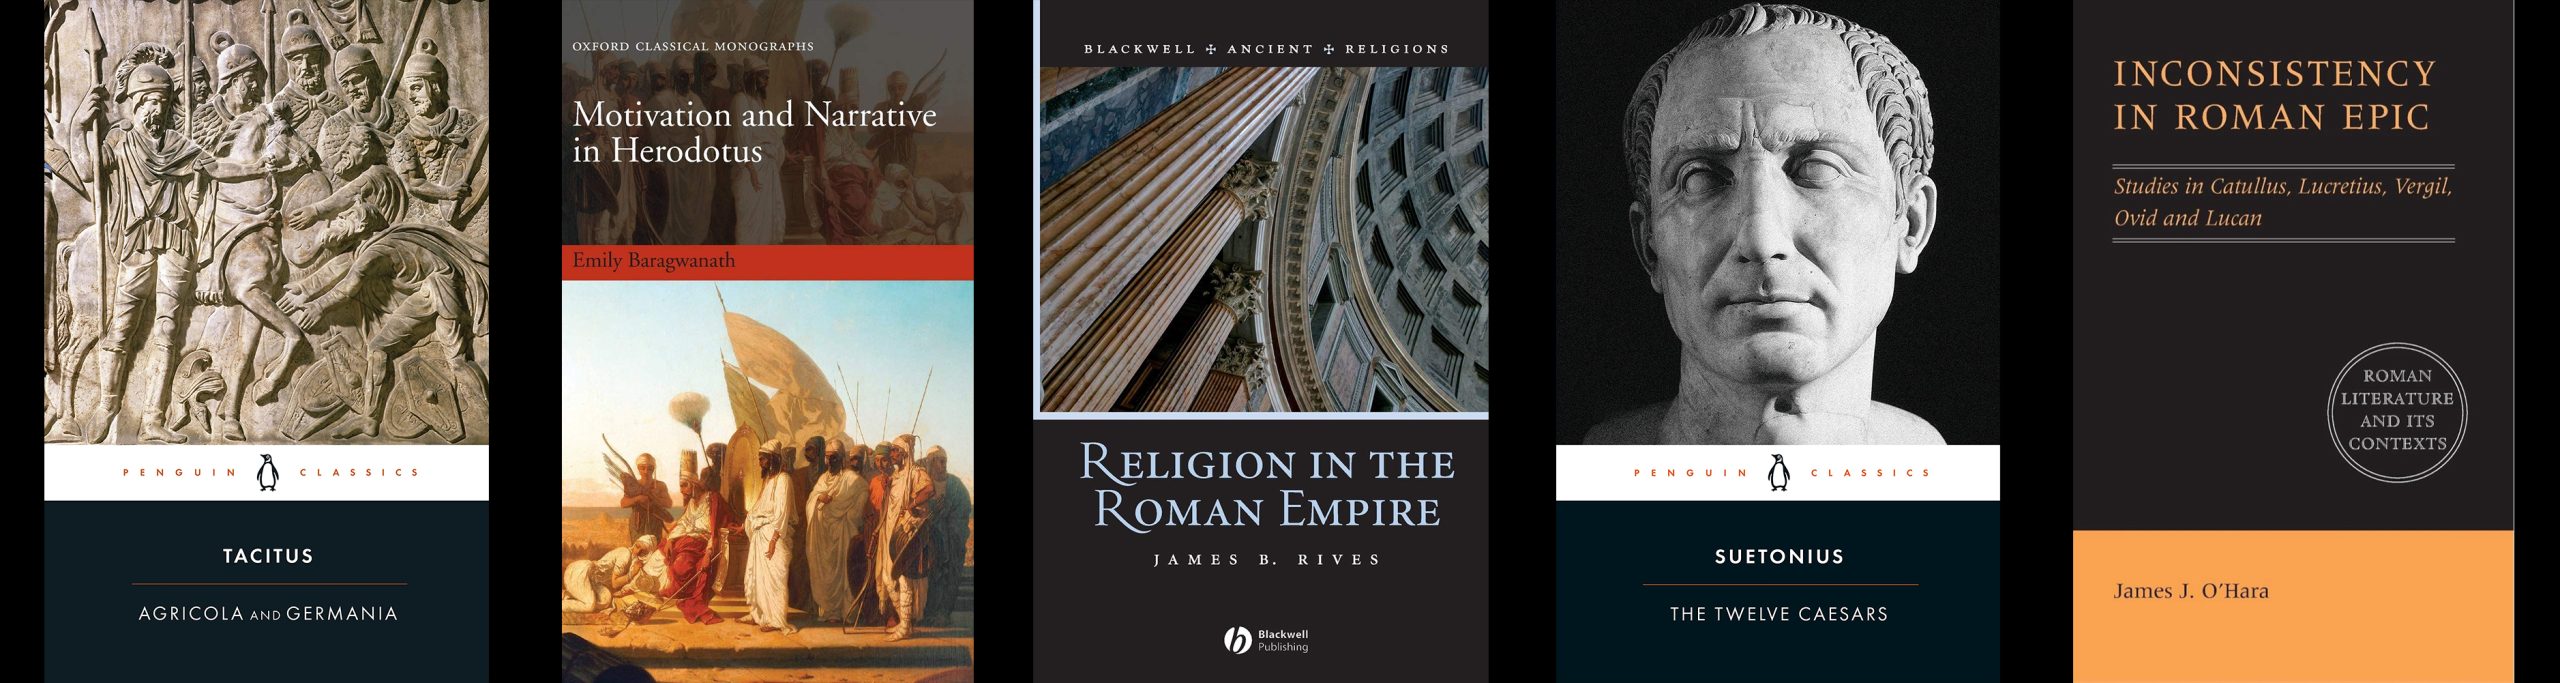 First Book: Tacitus: Agricola and Germania. Second Book: Motivation and Narrative in Herodotus, Emily Baragwanath. Third Book: Religion in the Roman Empire, James B. Rives. Fourth Book: Suetonius: The Twelve Caesars. Fifth Book: Inconsistency in Roman Epic: Studies in Catullus, Lucretius, Vergil, Ovid, and Lucan, James J. O'Hara.